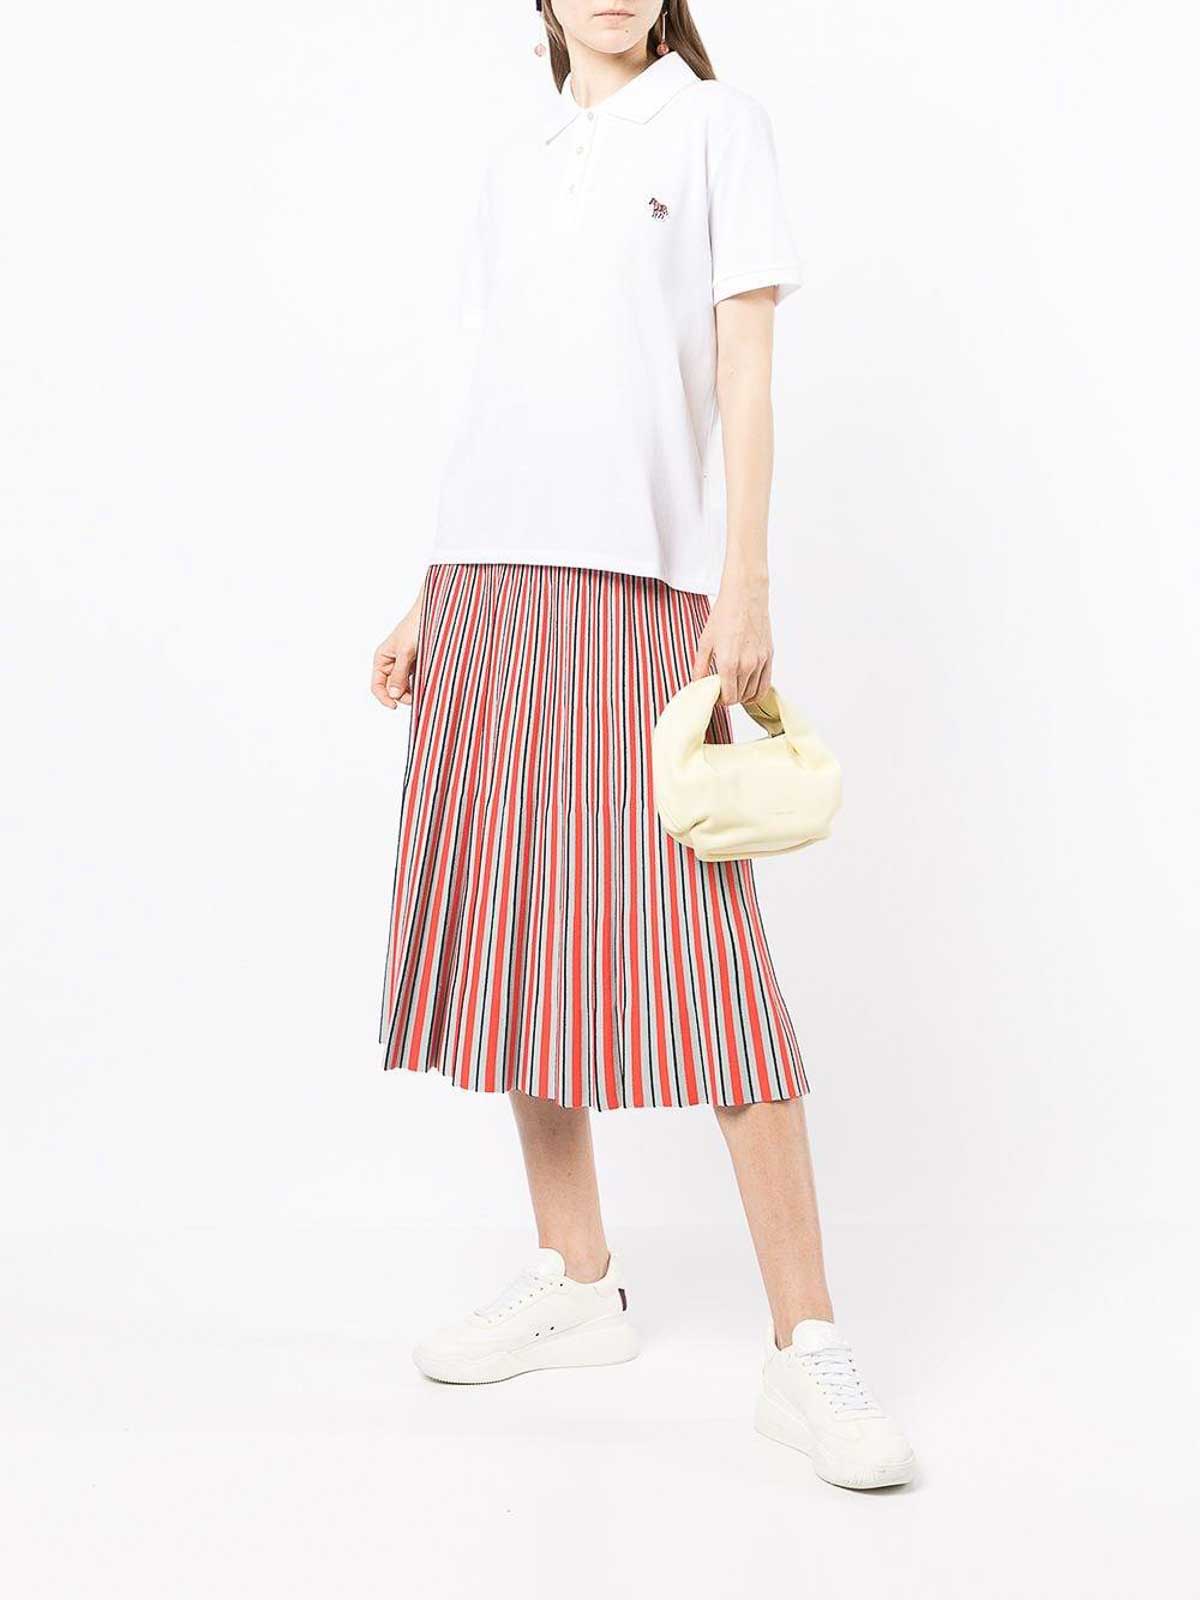 Shop Paul Smith Top - Blanco In White